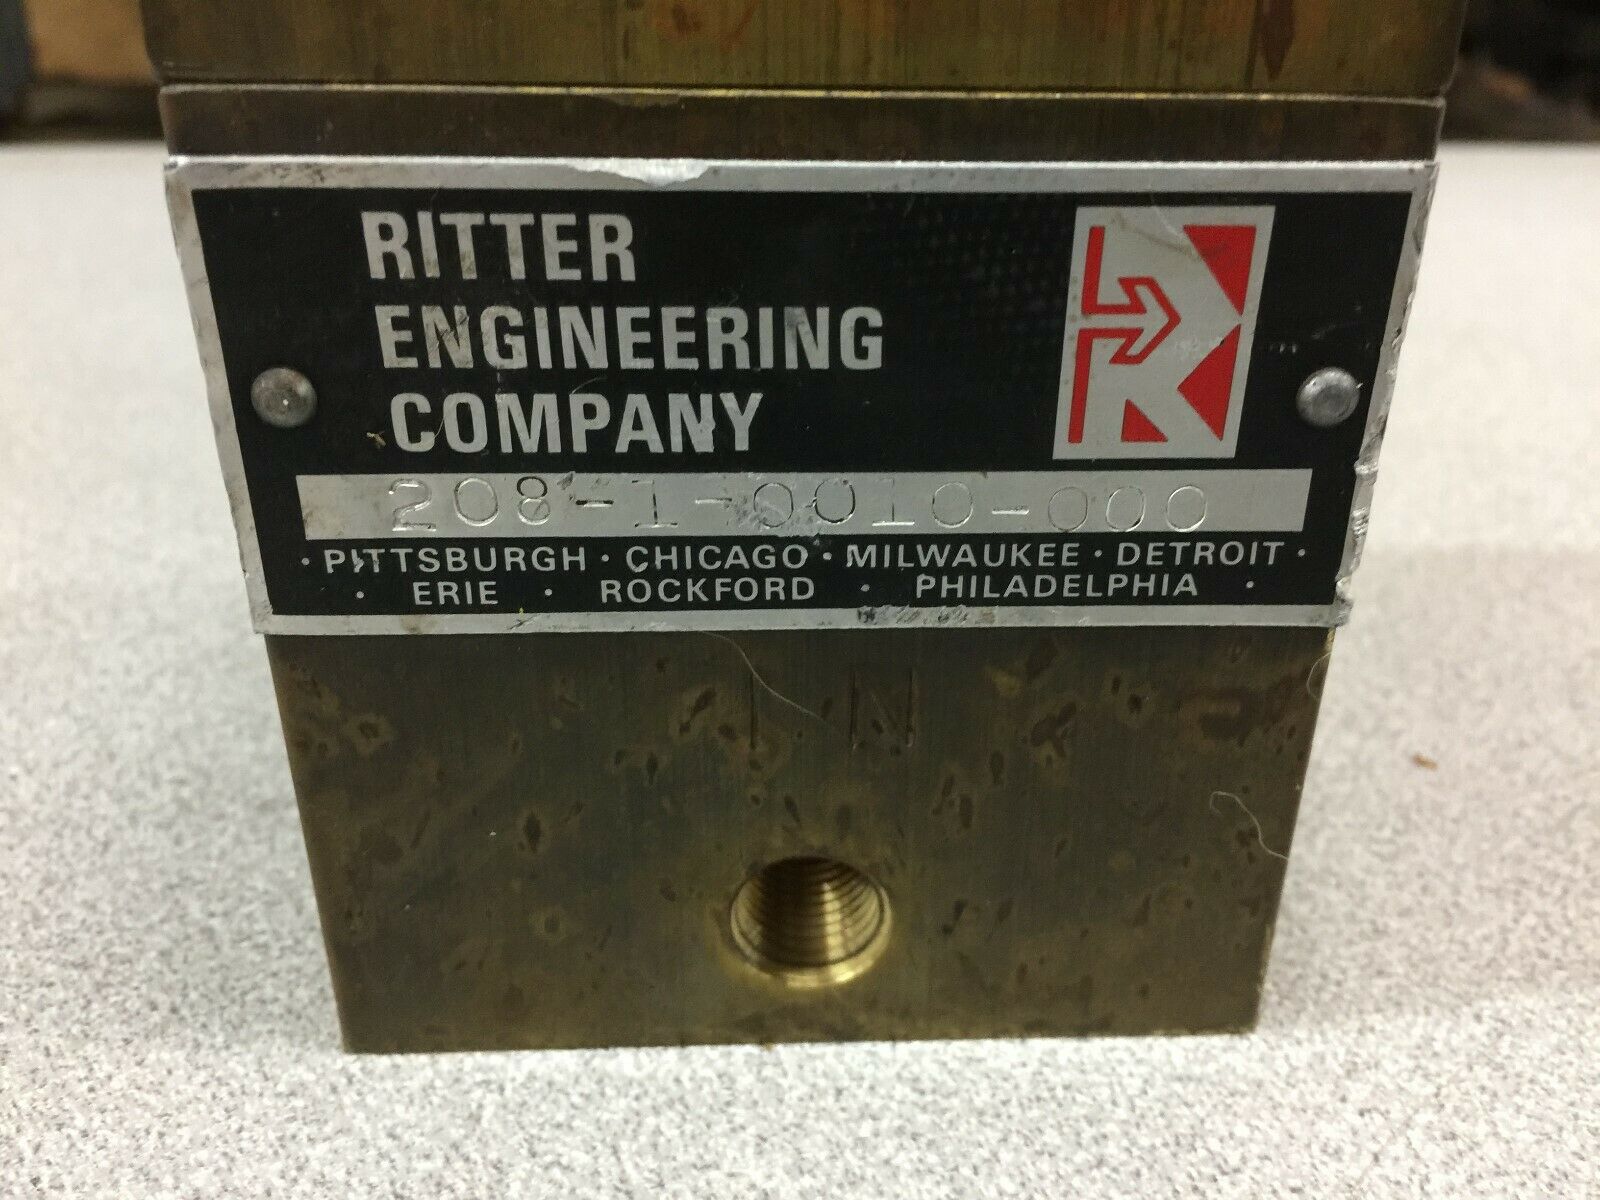 USED RITTER FLOW CONTROL VALVE 208-1-0010-000